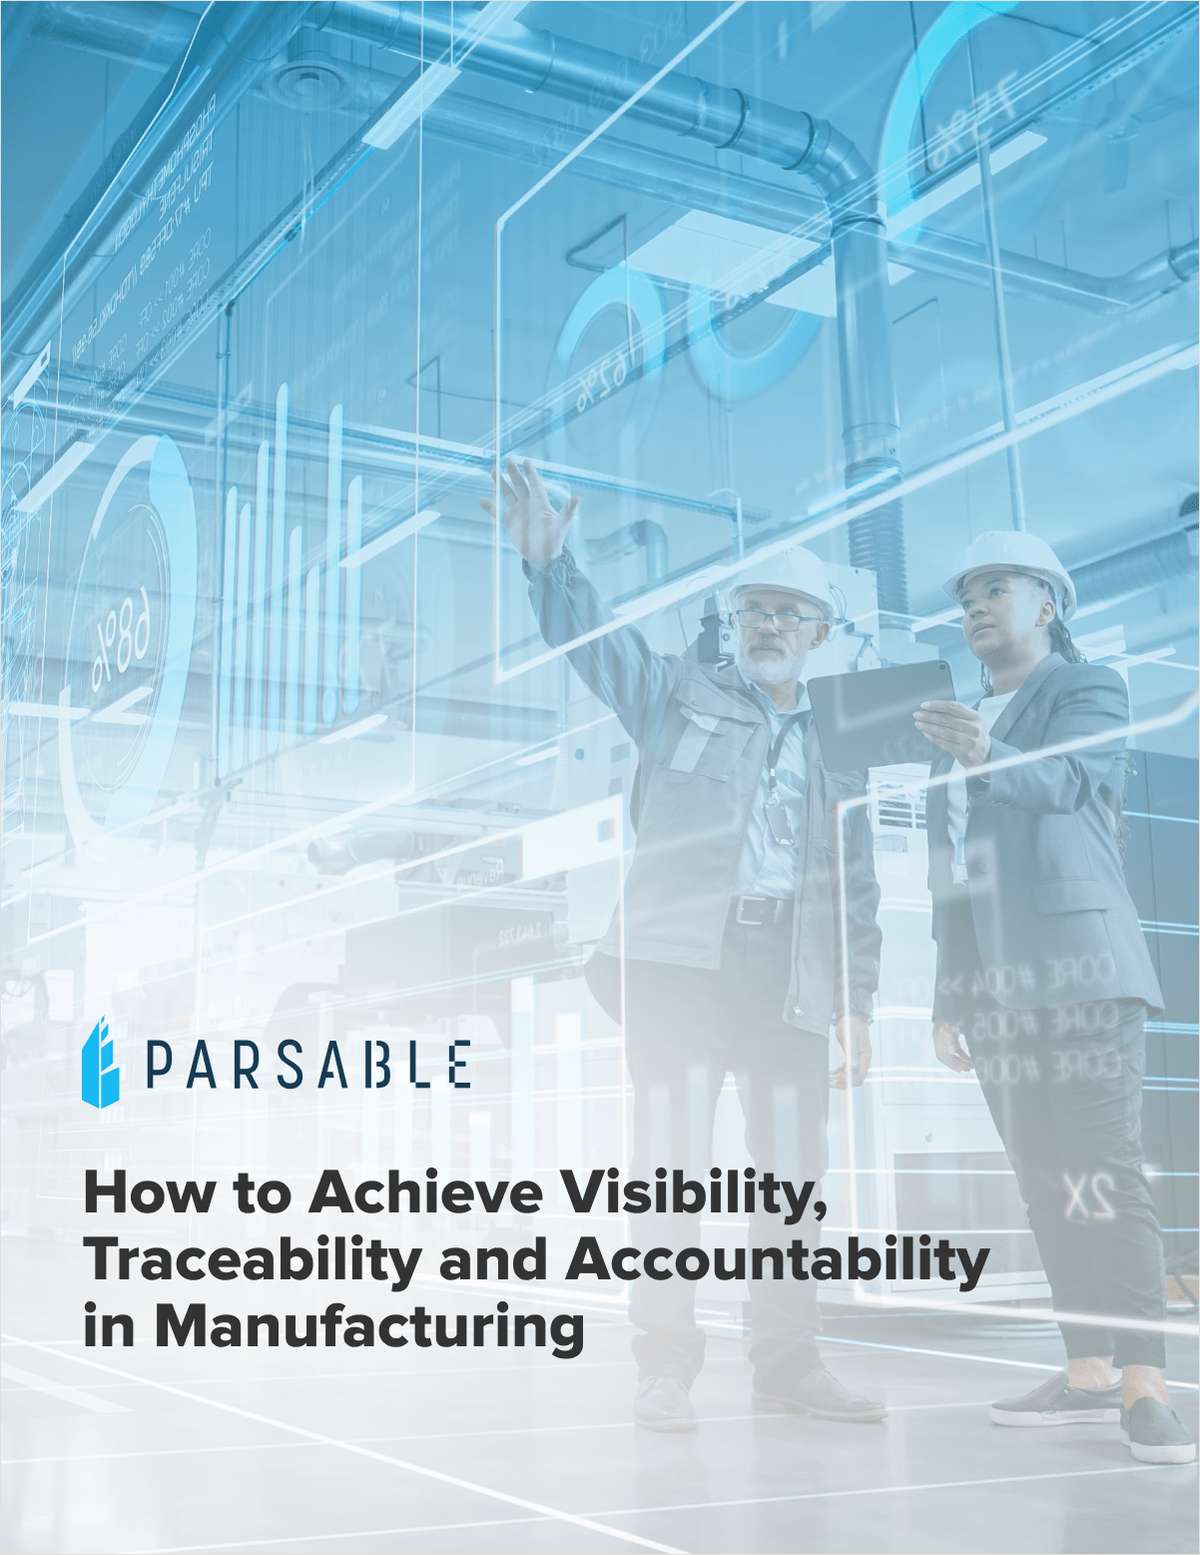 How to Achieve Visibility, Traceability, and Accountability in Manufacturing